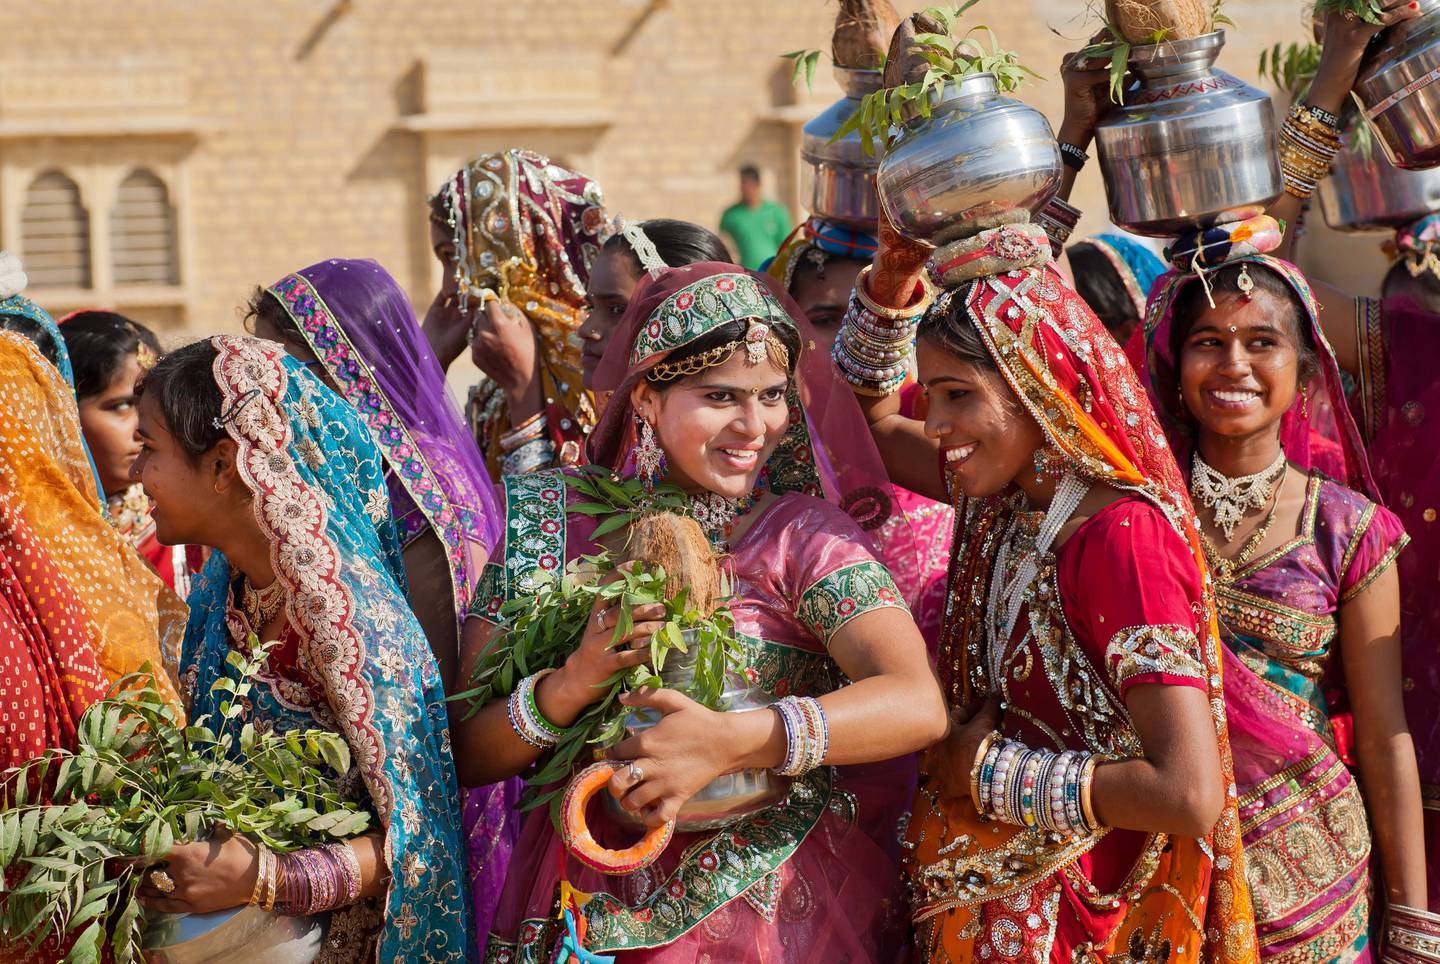 Young women dressed in traditional indian sari at the Desert Festival on March 1, 2015. Shutterstock.